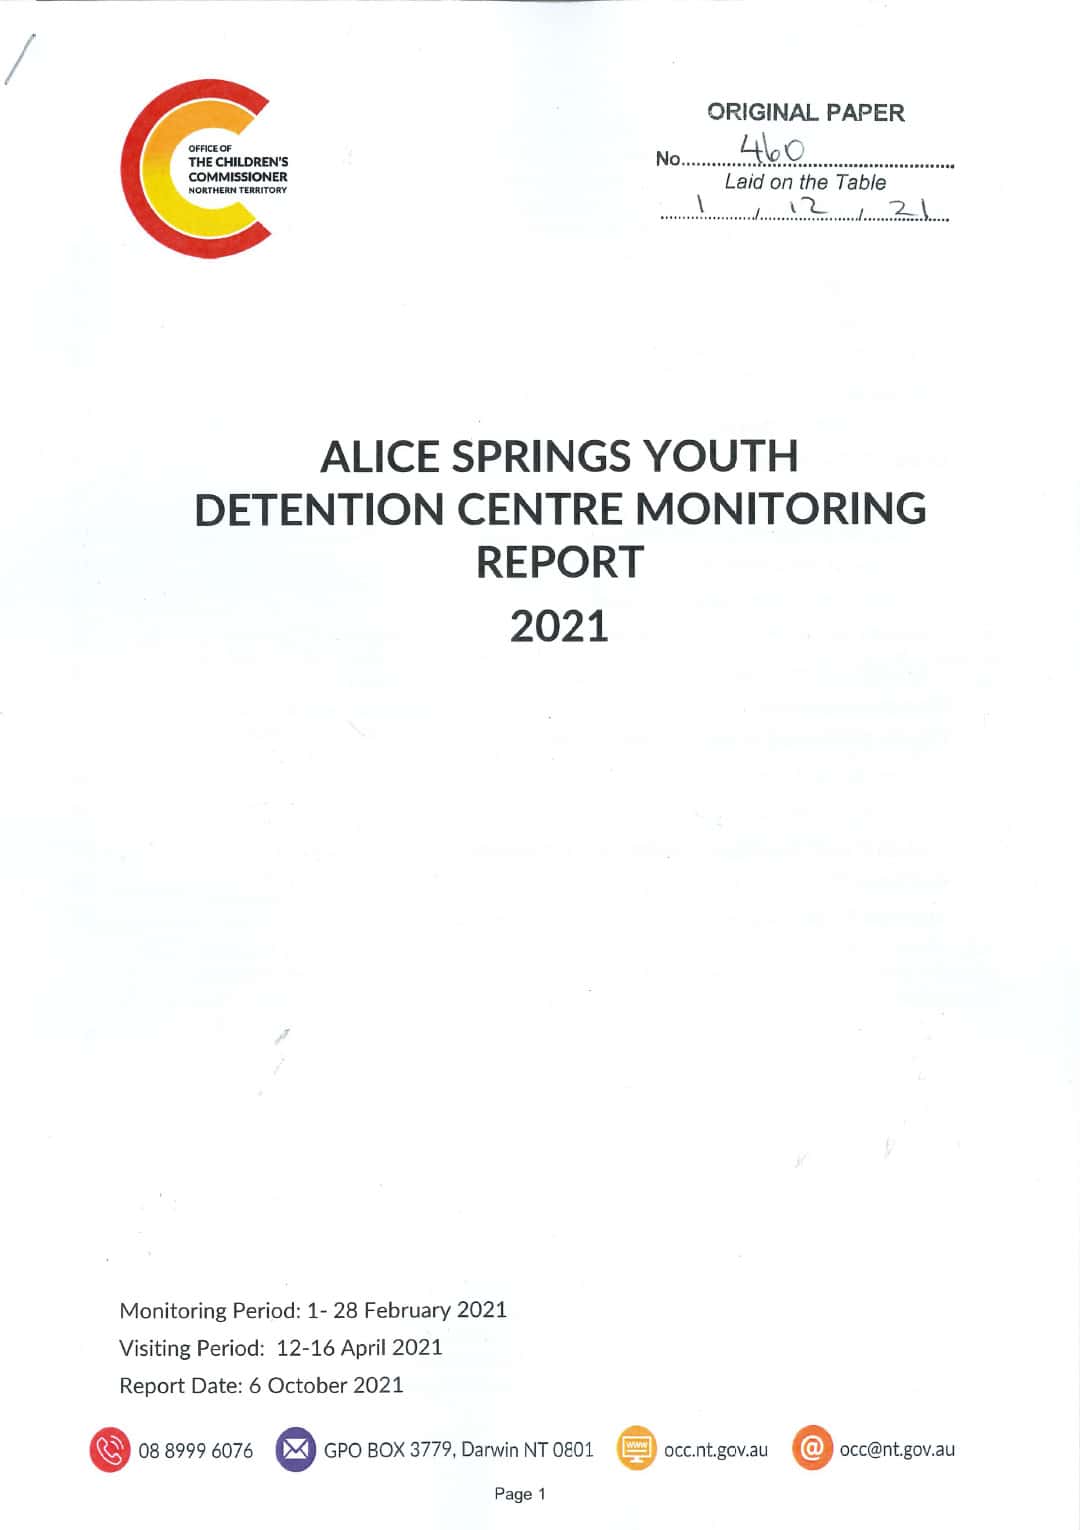 2021 Alice Springs Youth Detention Center - Monitoring Report